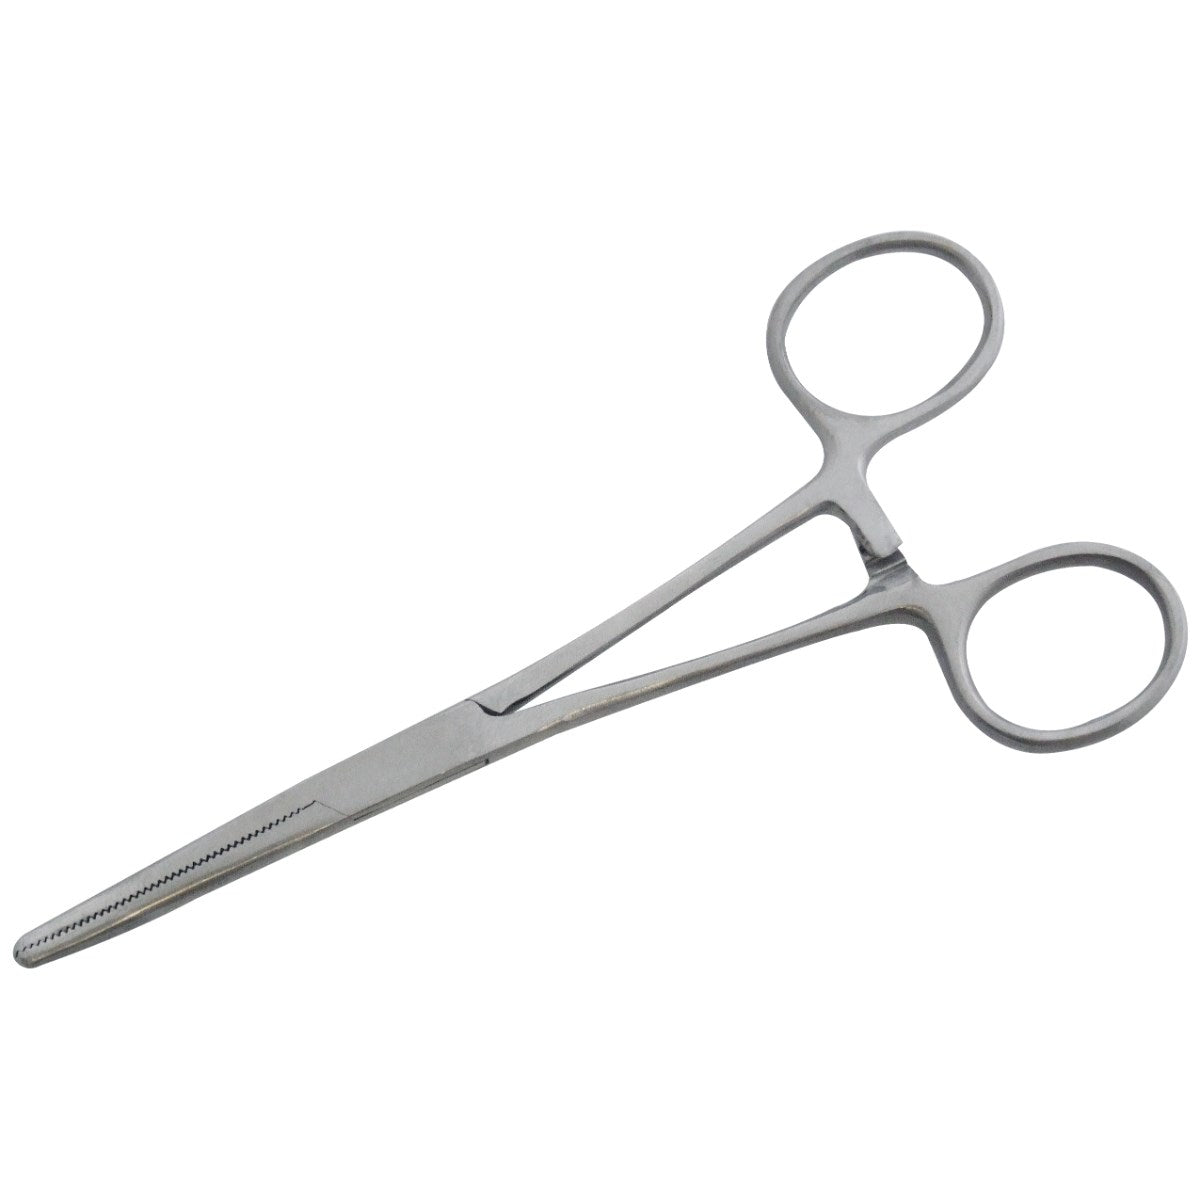 amtech straight stainless steel forceps 140mm ( 5.5")